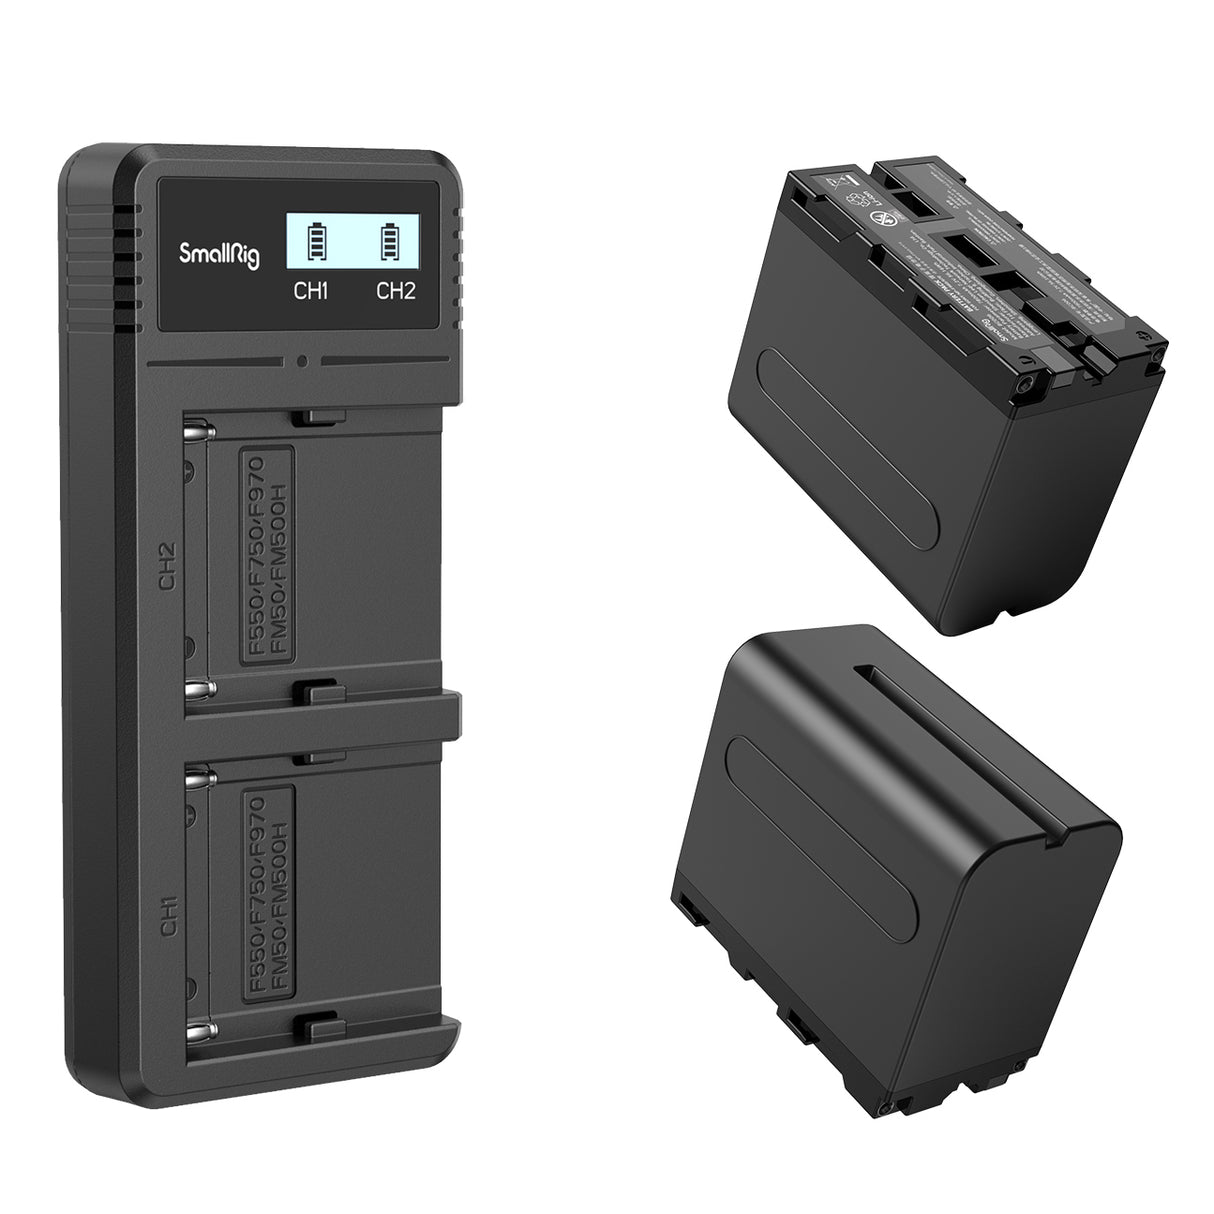 Smallrig NP-F970 battery and charger kit